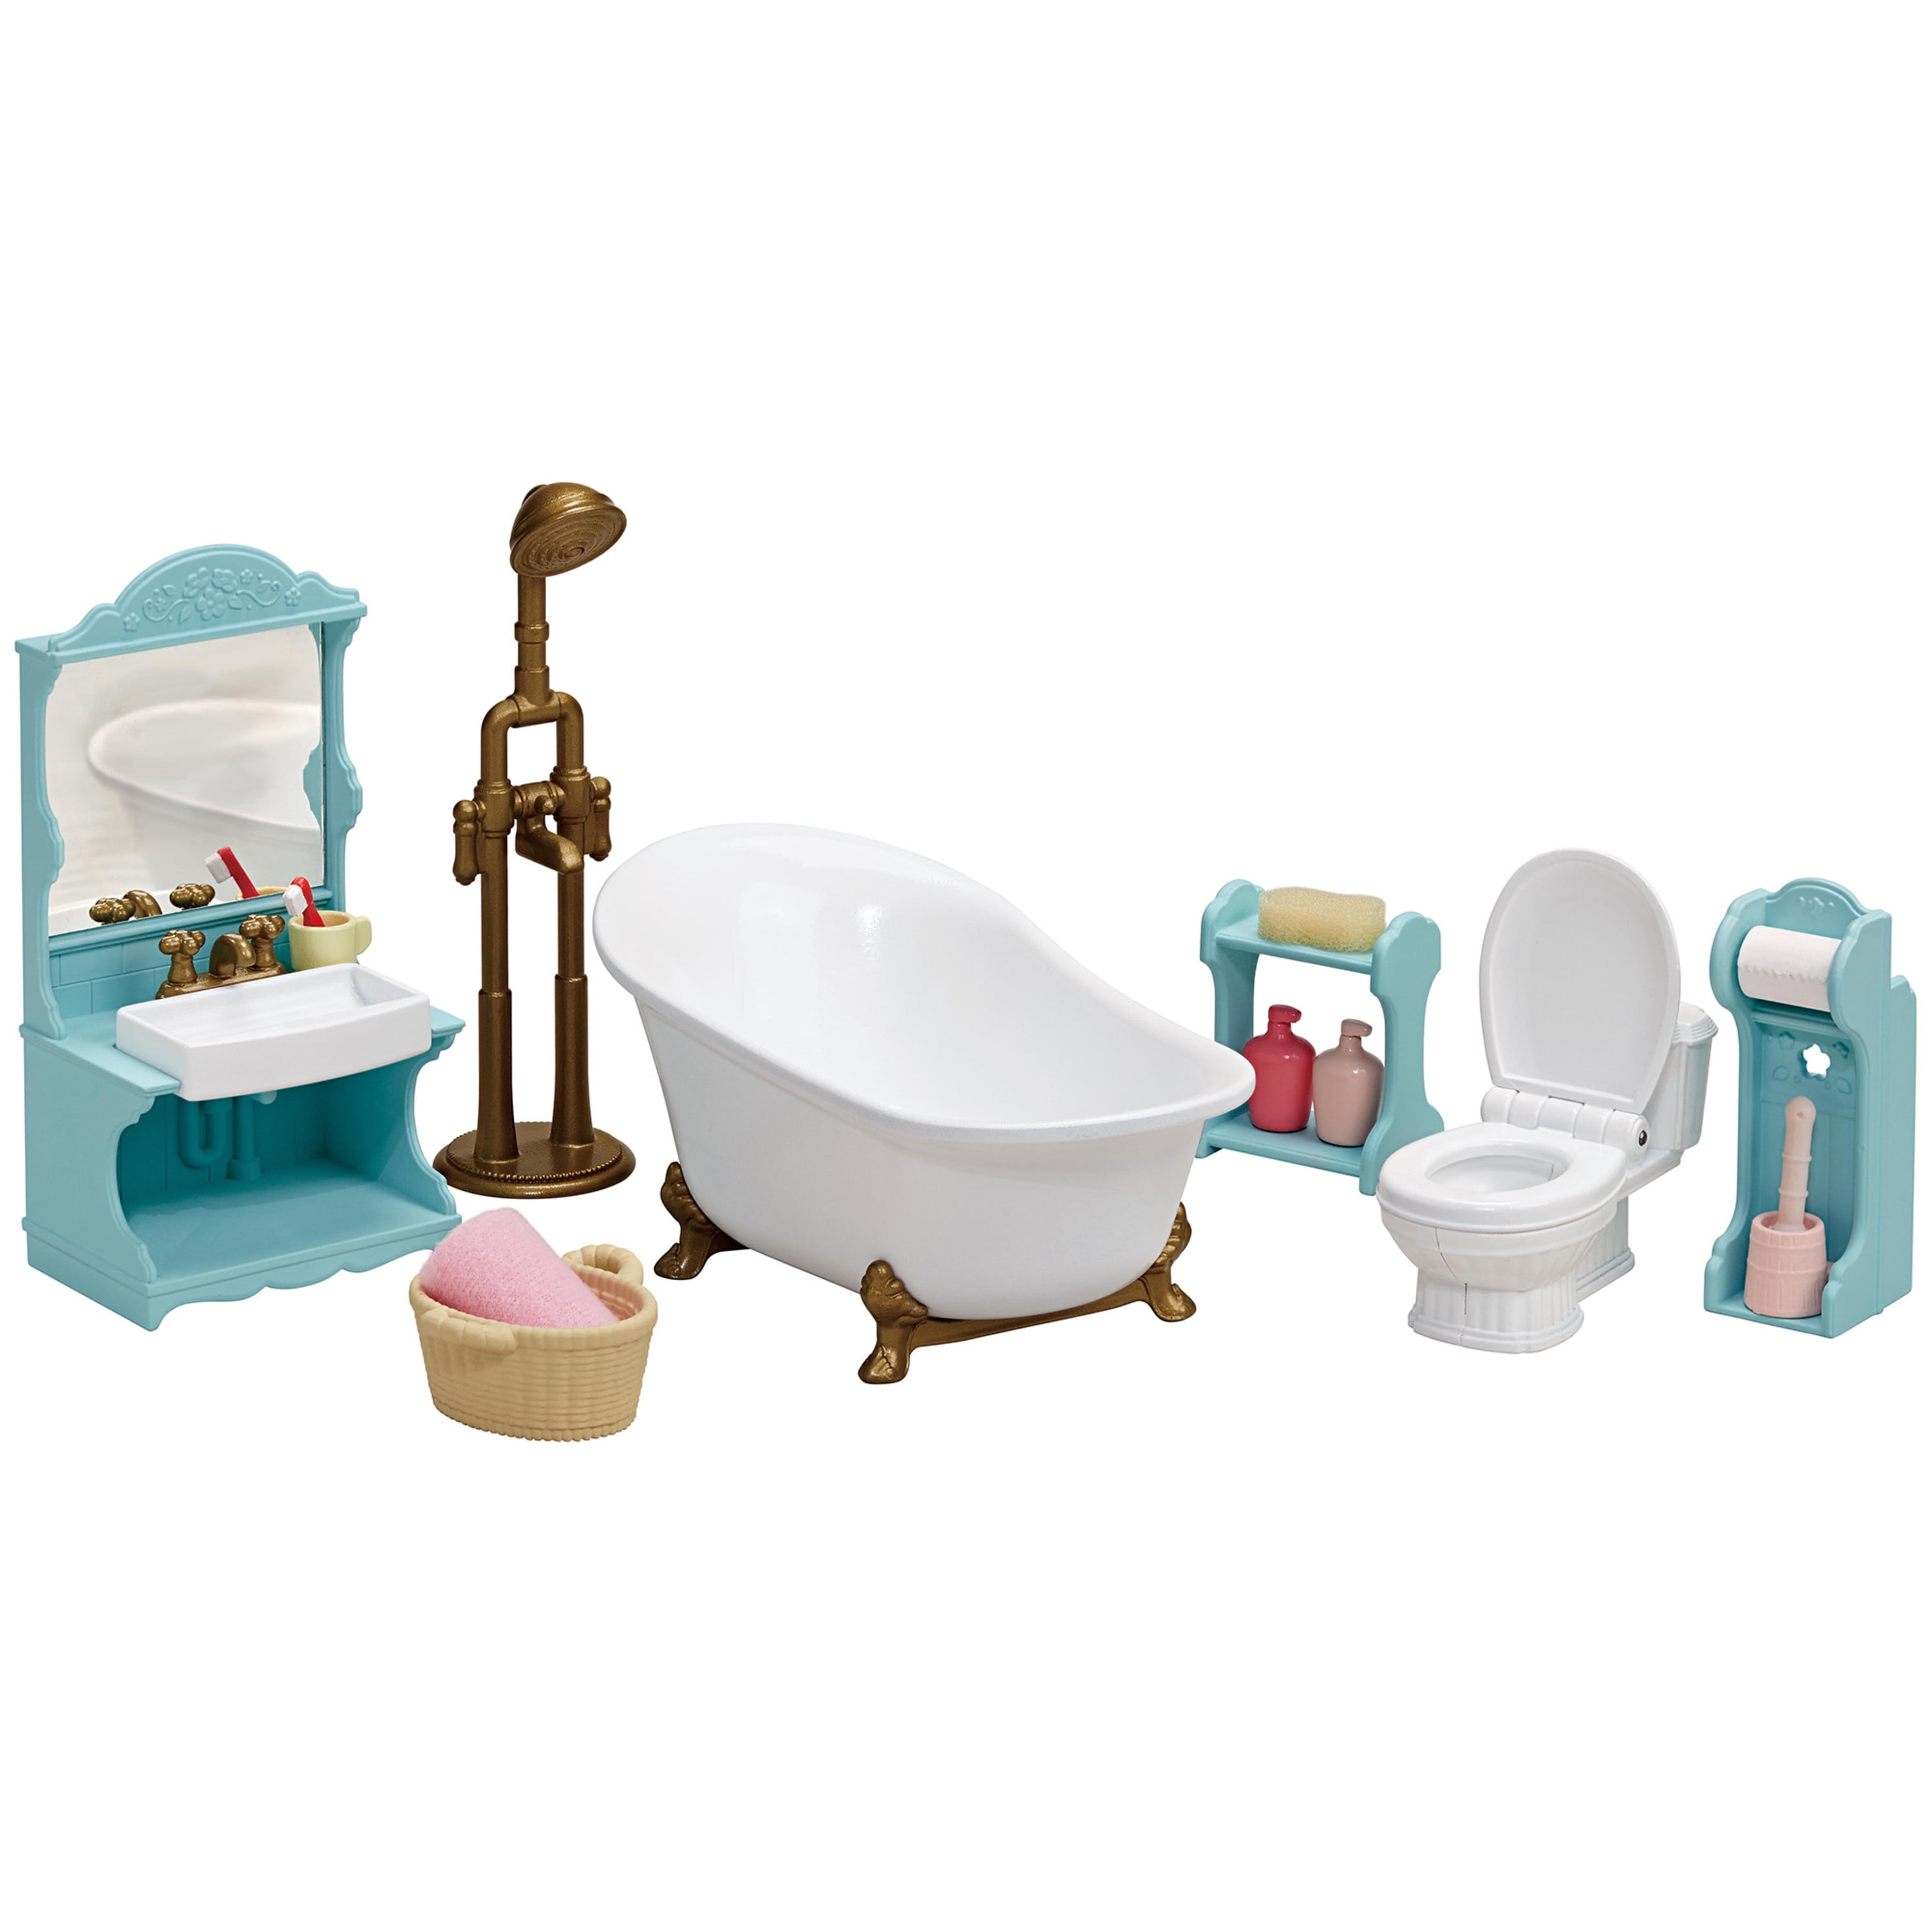 NEW CALICO CRITTERS COUNTRY BATHROOM SET CC1748 OVER 20 PIECES 3+ 